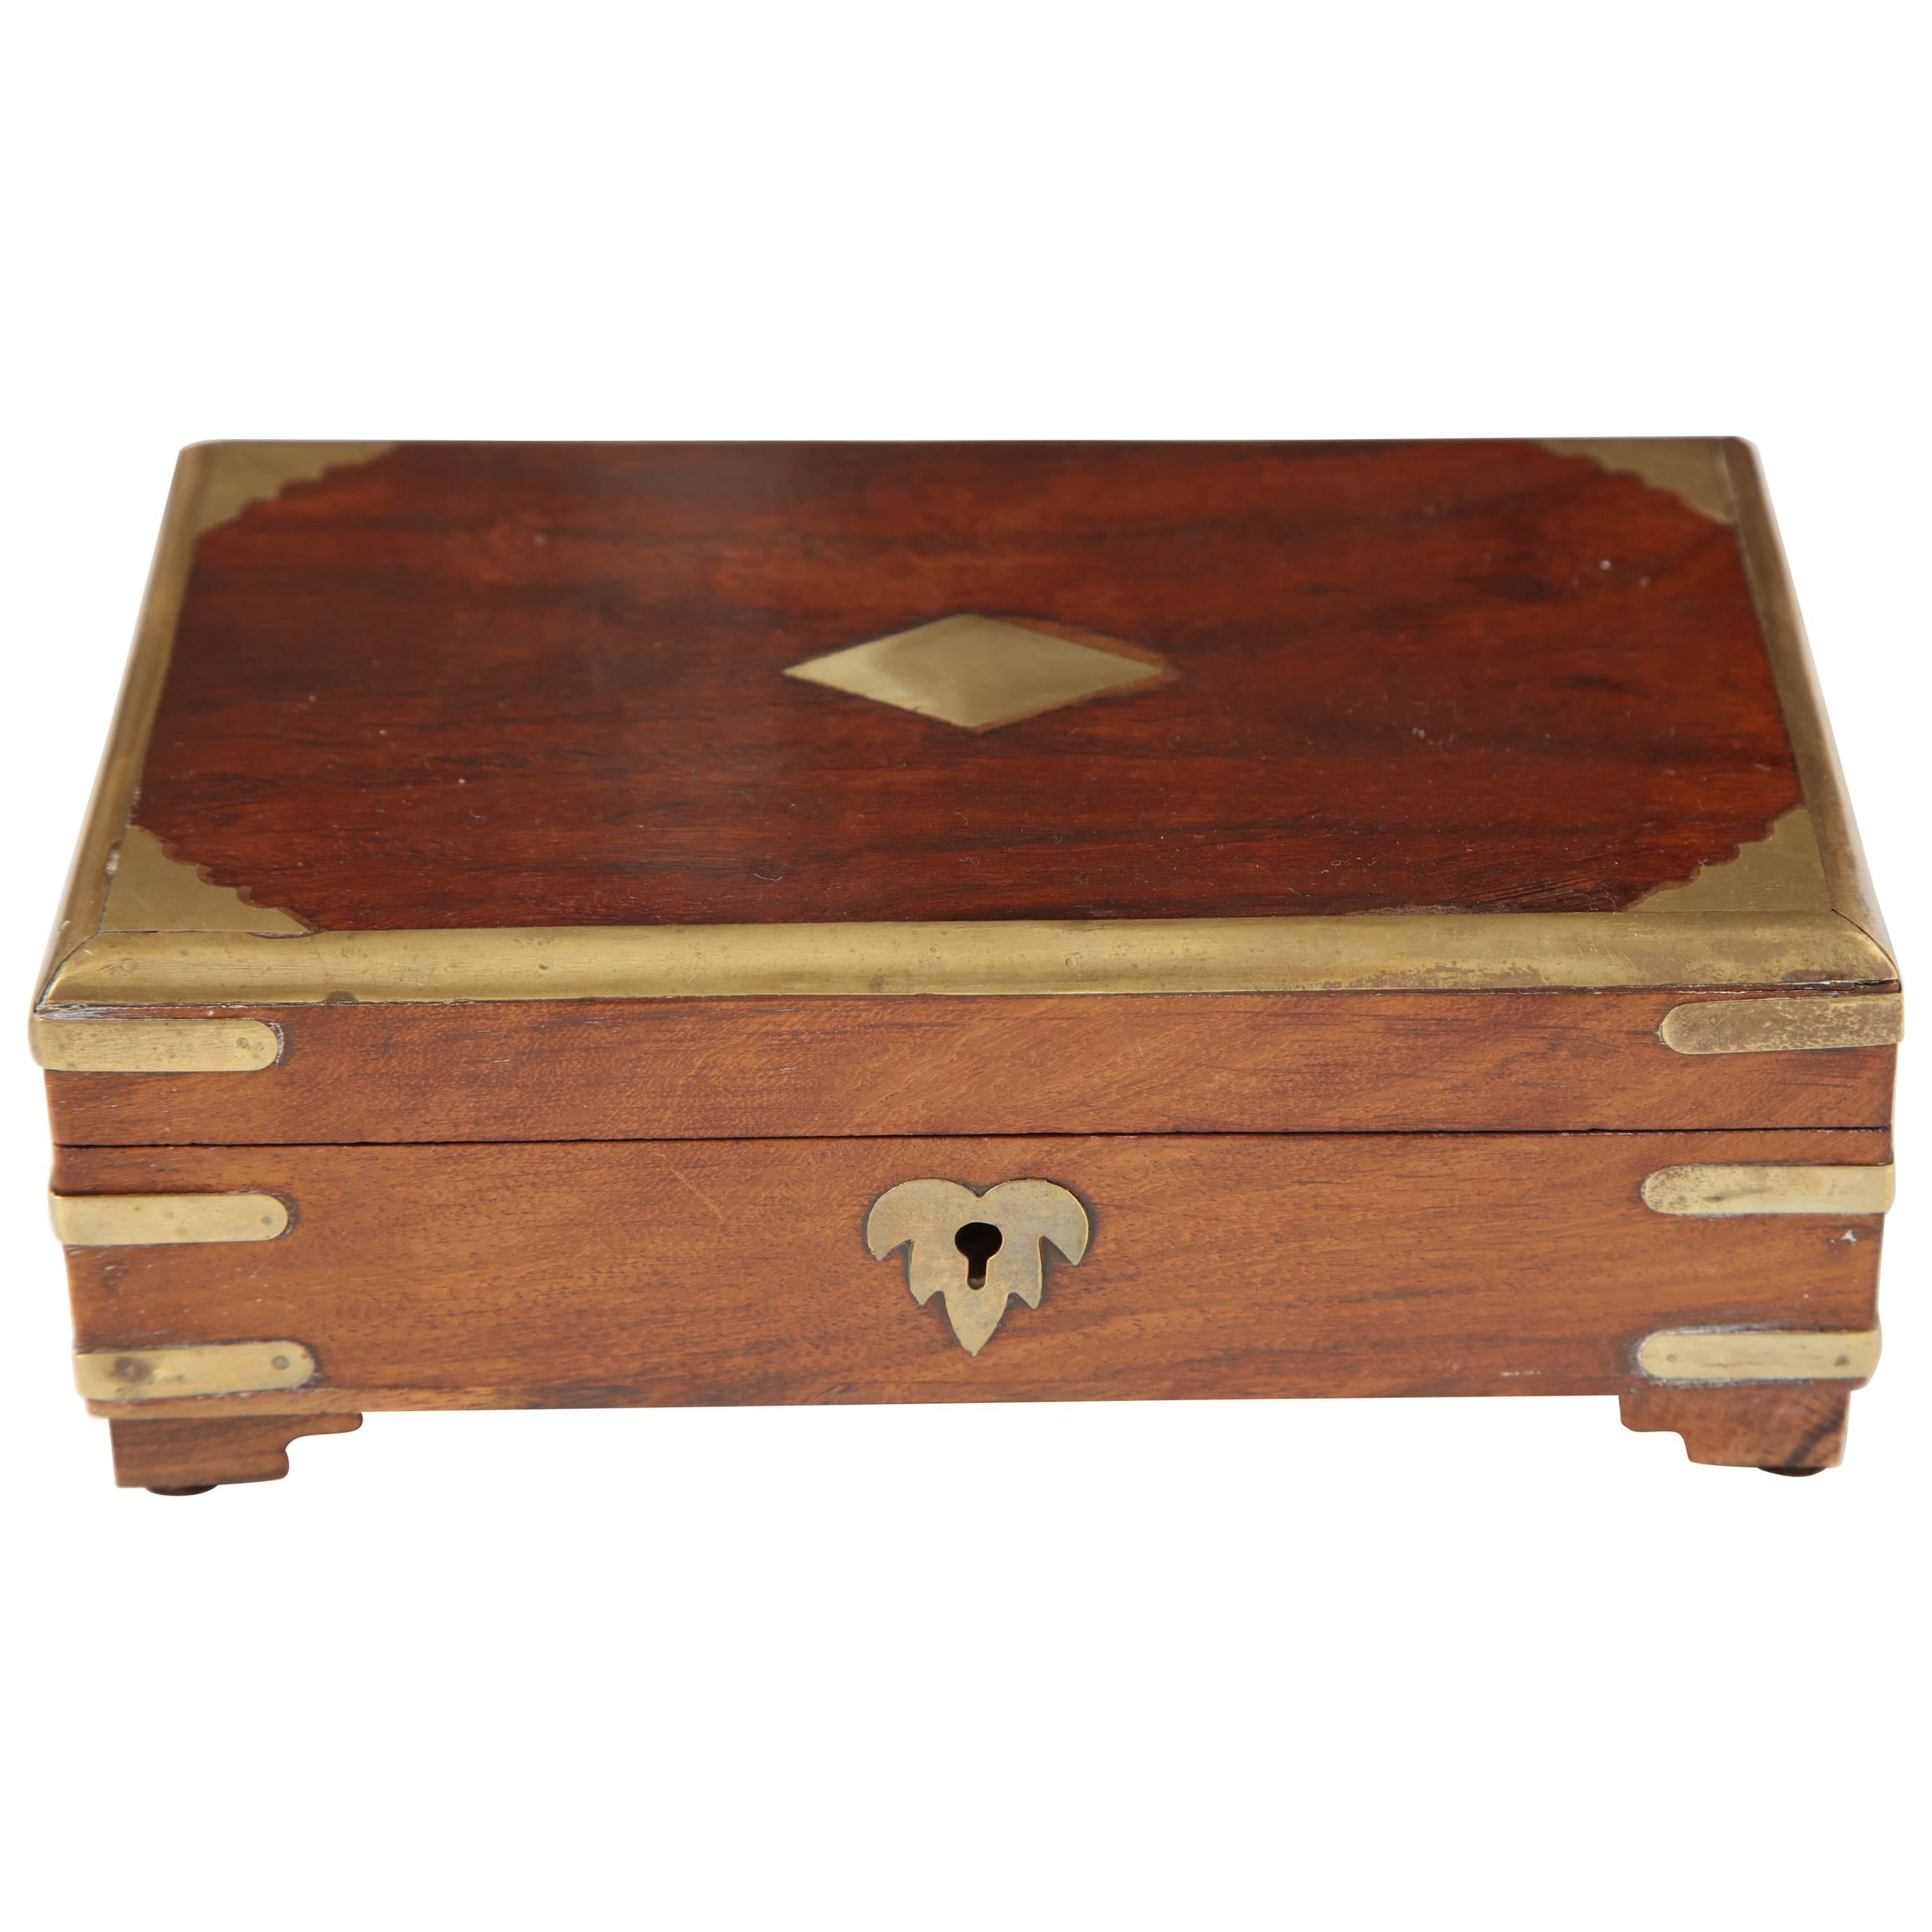 Vintage Brass and Wood Box